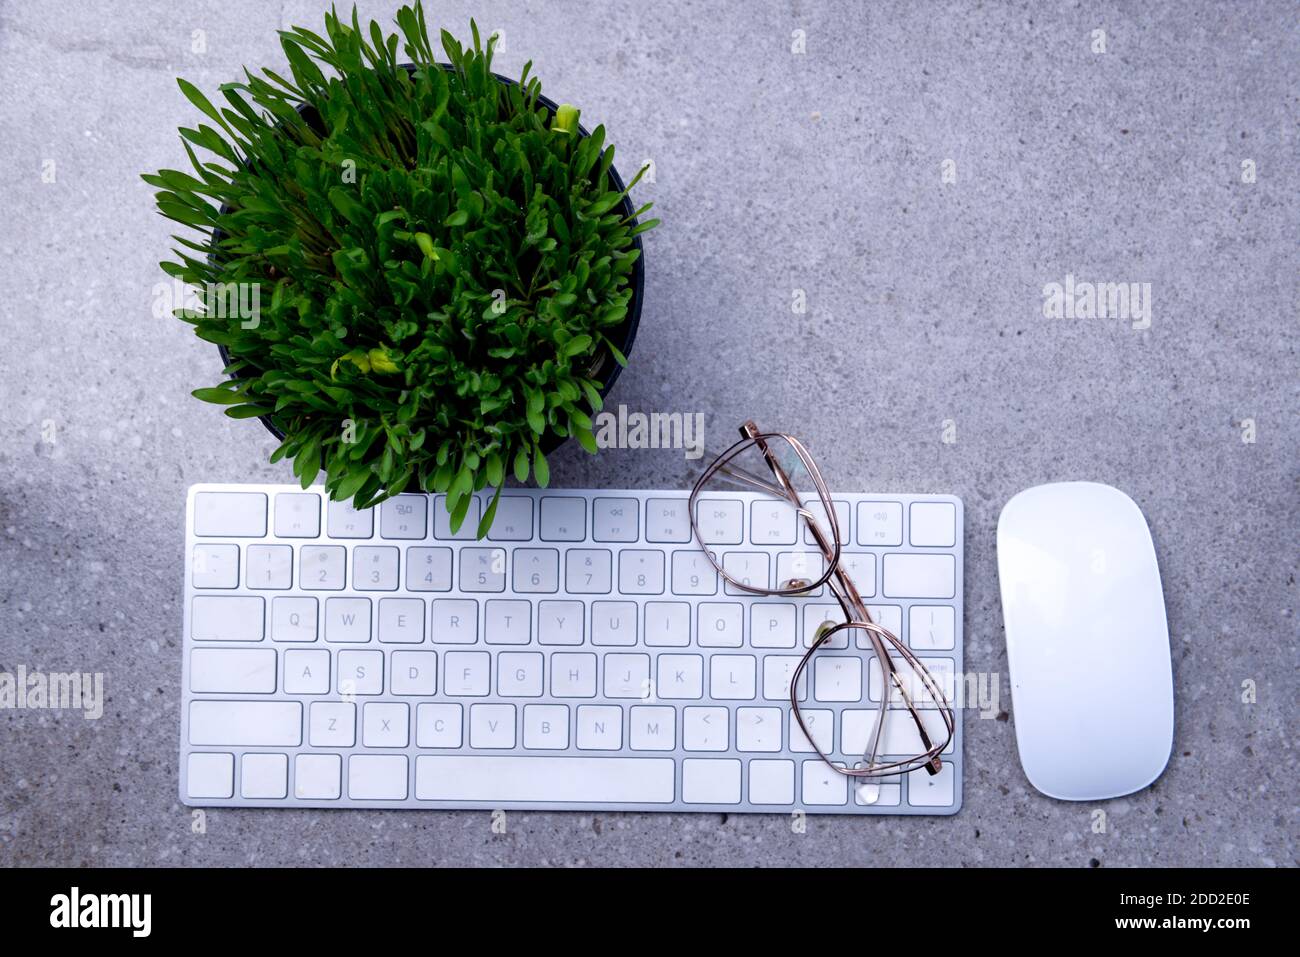 Close up view of millet grass plant in the pot with the keyboard on the desk Stock Photo